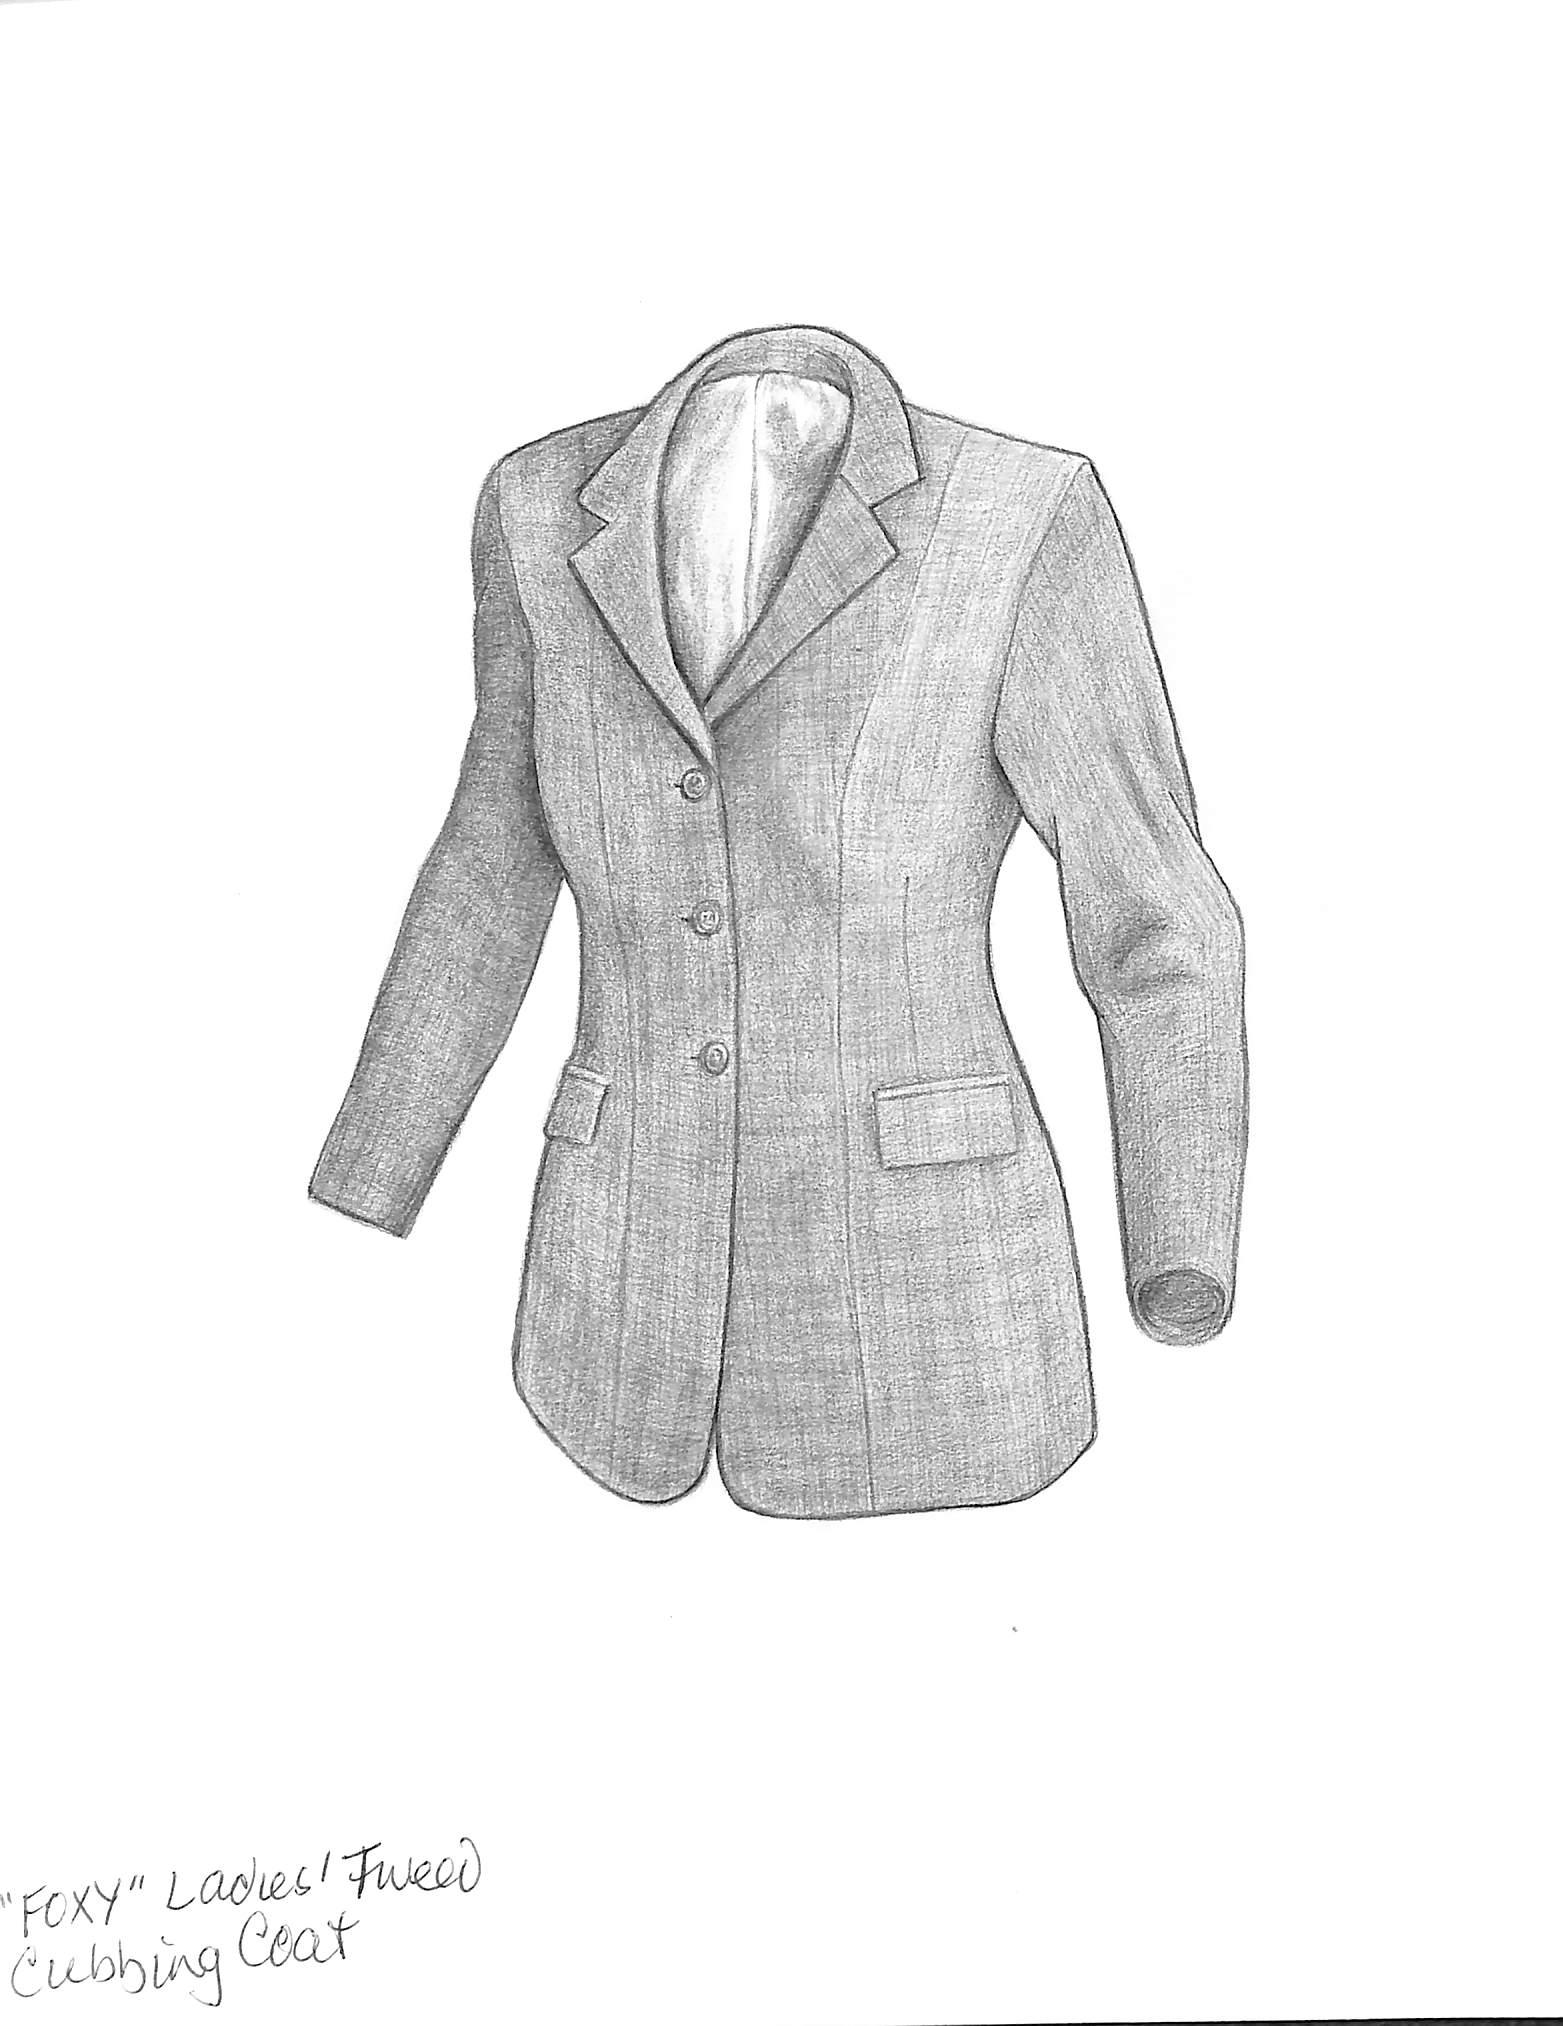 "Foxy" Ladies' Tweed Cubbing Coat 2002 Graphite Drawing - Art by Unknown